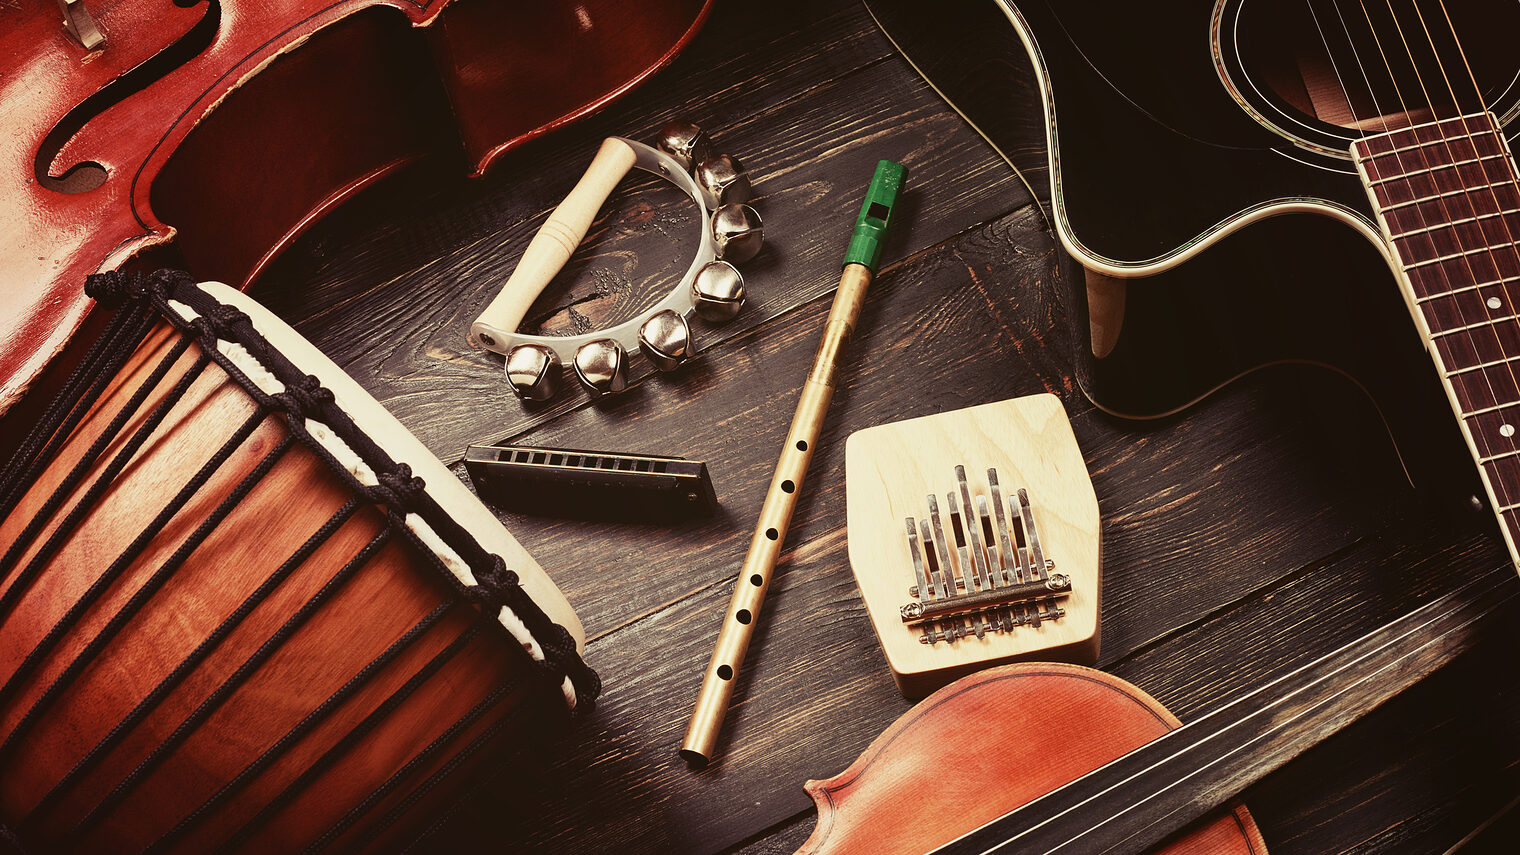 Set of musical instruments on dark wooden background: guitar, violin, harmonica, cello and others. Top view. Vintage retro effect filtered, hipster style Schlagwort(e): instrumental, instrument, music, musical, band, closeup, melody, classical, string, craft, acoustic, orchestra, rock, musician, concept, sound, symphony, tone, light, folk, guitar, equipment, modern, grey, object, audio, blues, tune, concert, classic, flute, volume, art, jazz, background, play, note, brass, stringed, metal, performance, kalimba, whistle, harmonica, guitar, viola, violin, drum, darbuka, cello, top view, instrumental, instrument, music, musical, band, closeup, melody, classical, string, craft, acoustic, orchestra, rock, musician, concept, sound, symphony, tone, light, folk, guitar, equipment, modern, grey, object, audio, blues, tune, concert, classic, flute, volume, art, jazz, background, play, note, brass, stringed, metal, performance, kalimba, whistle, harmonica, viola, violin, drum, darbuka, cello, top view